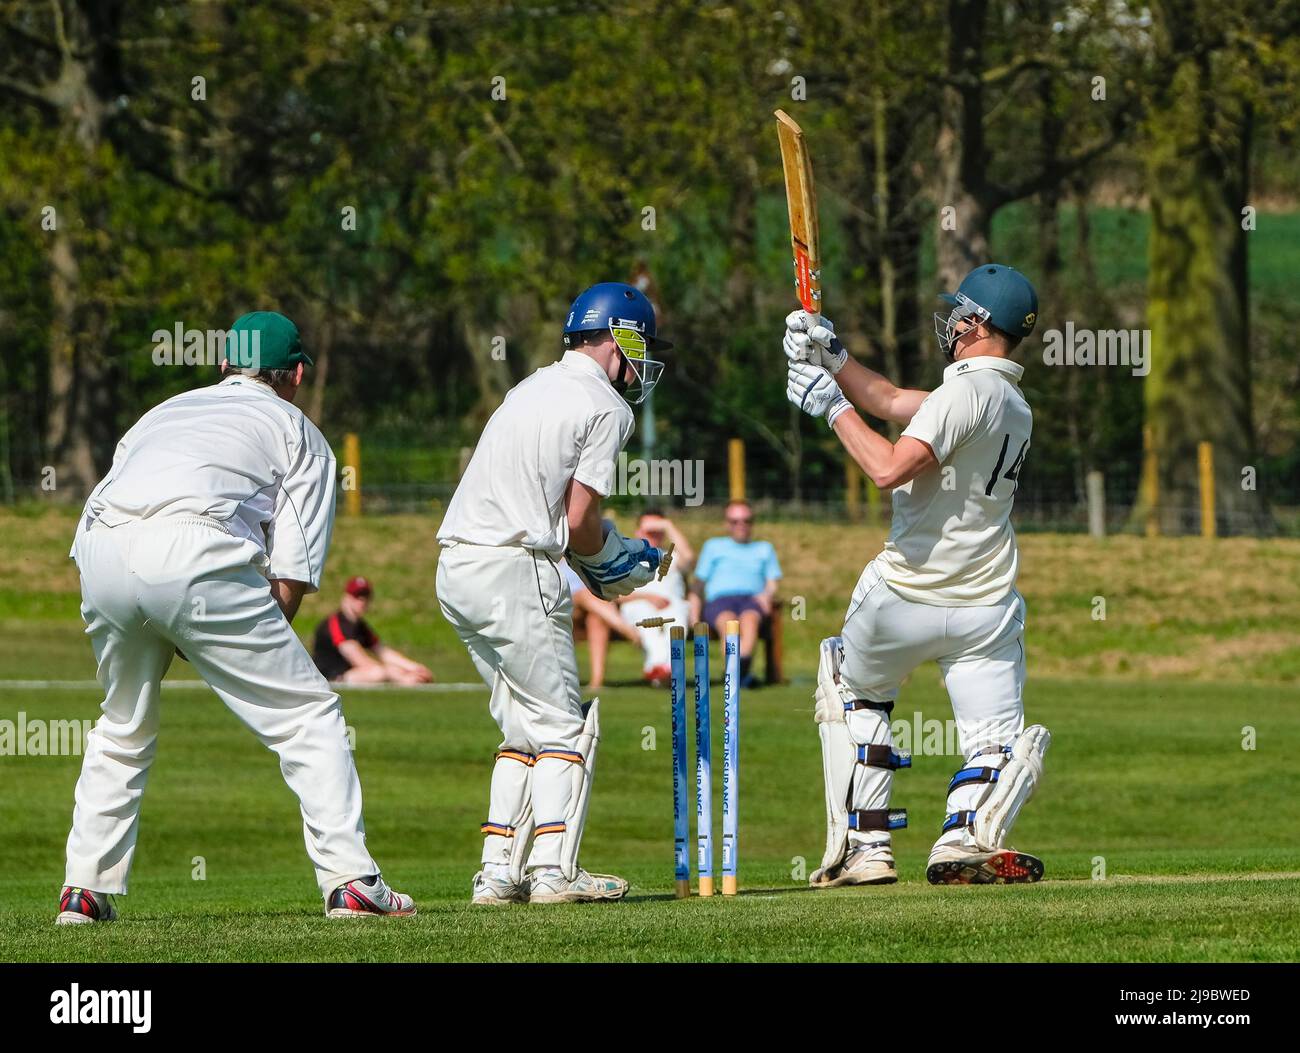 The bails come off as the batsman is bowled out. Stock Photo